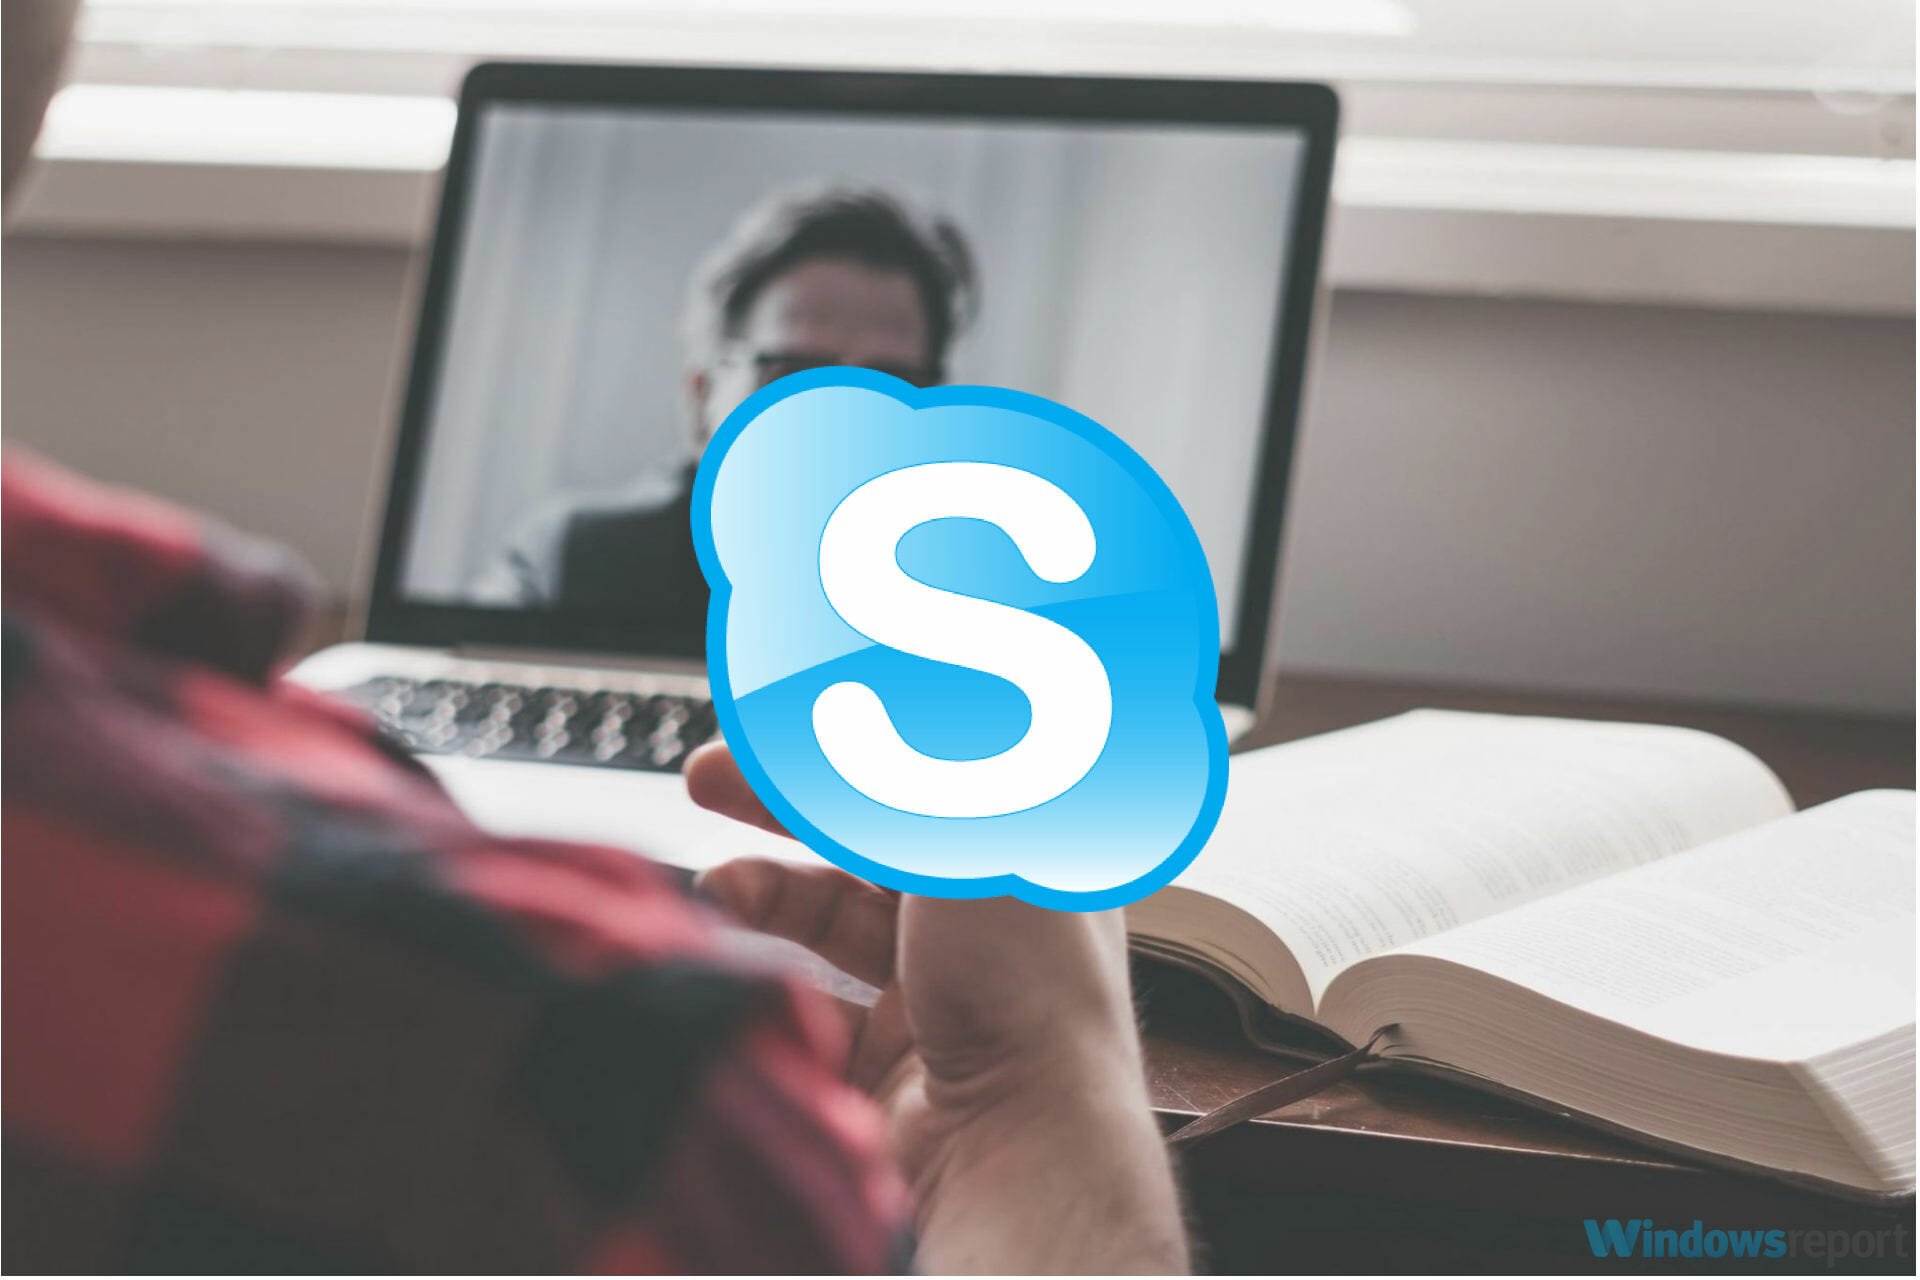 can you download skype conversations